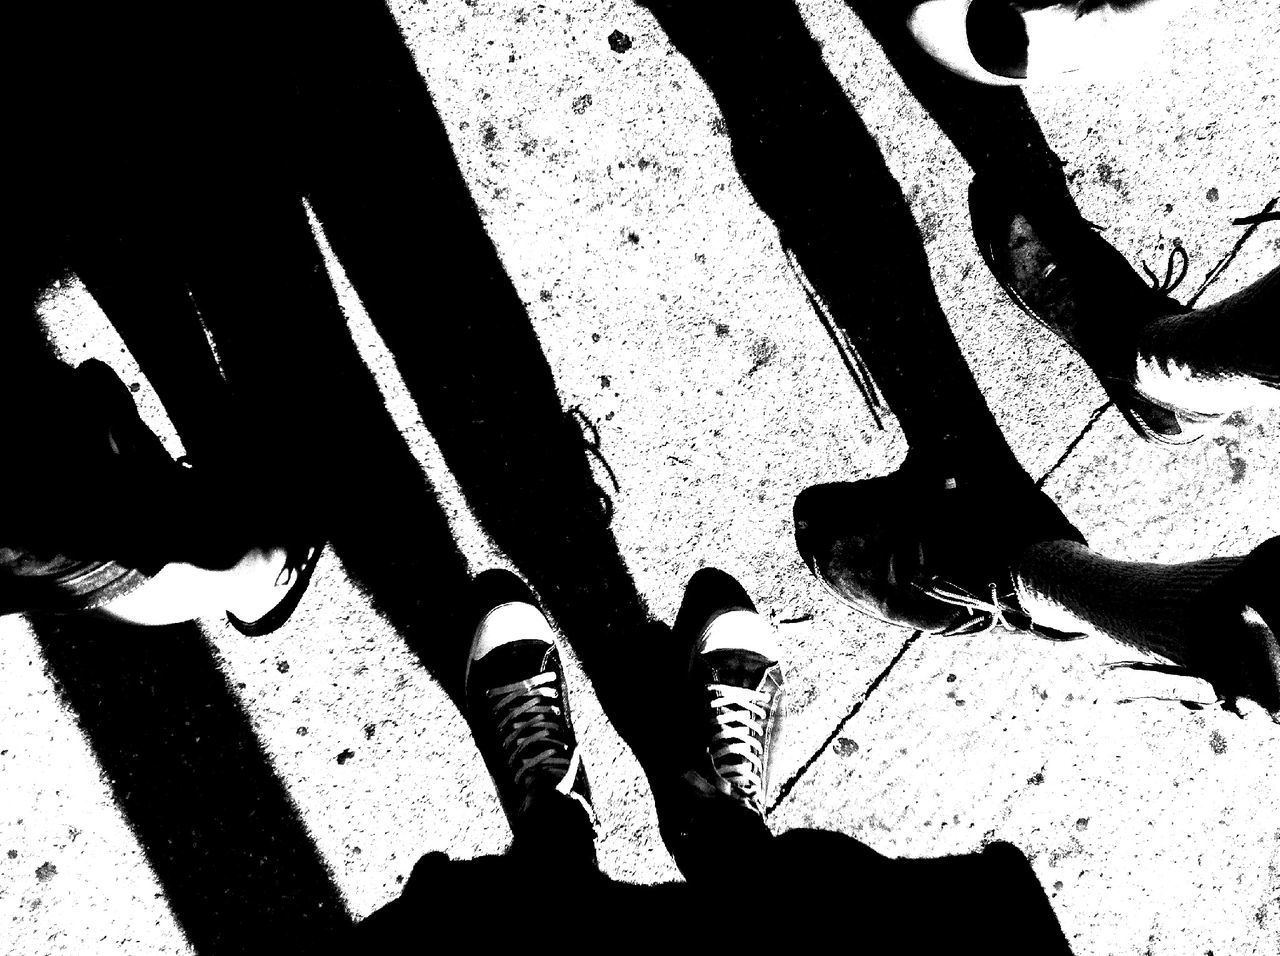 shadow, high angle view, lifestyles, low section, focus on shadow, leisure activity, person, sunlight, men, standing, street, unrecognizable person, silhouette, leaf, shoe, outdoors, day